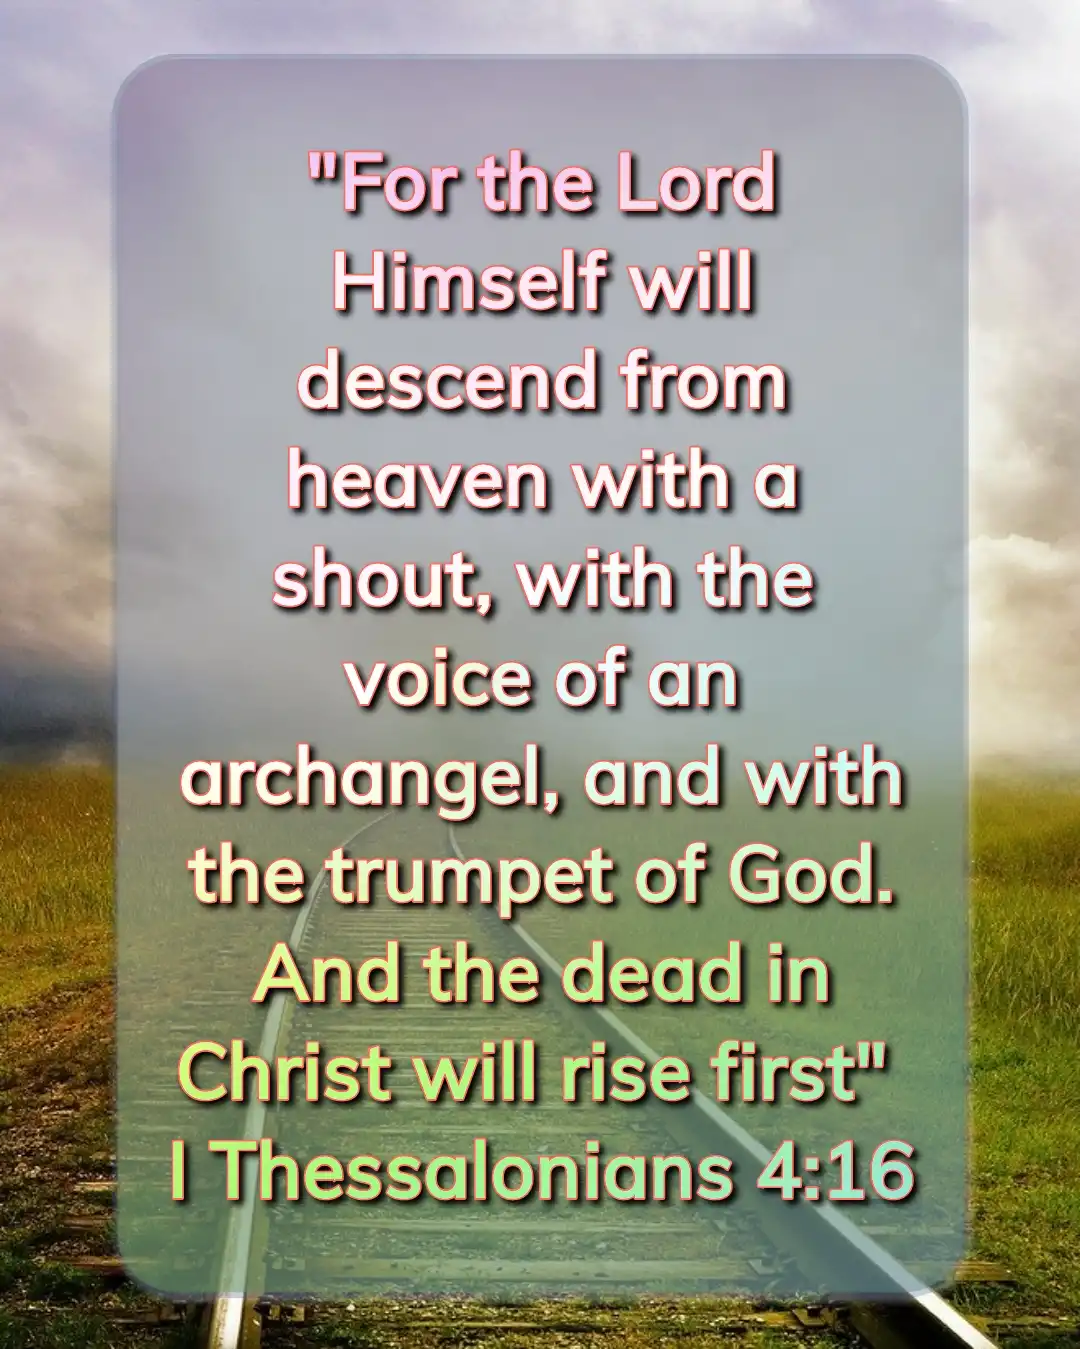 Bible Verses For Resurrection (1 Thessalonians 4:16)